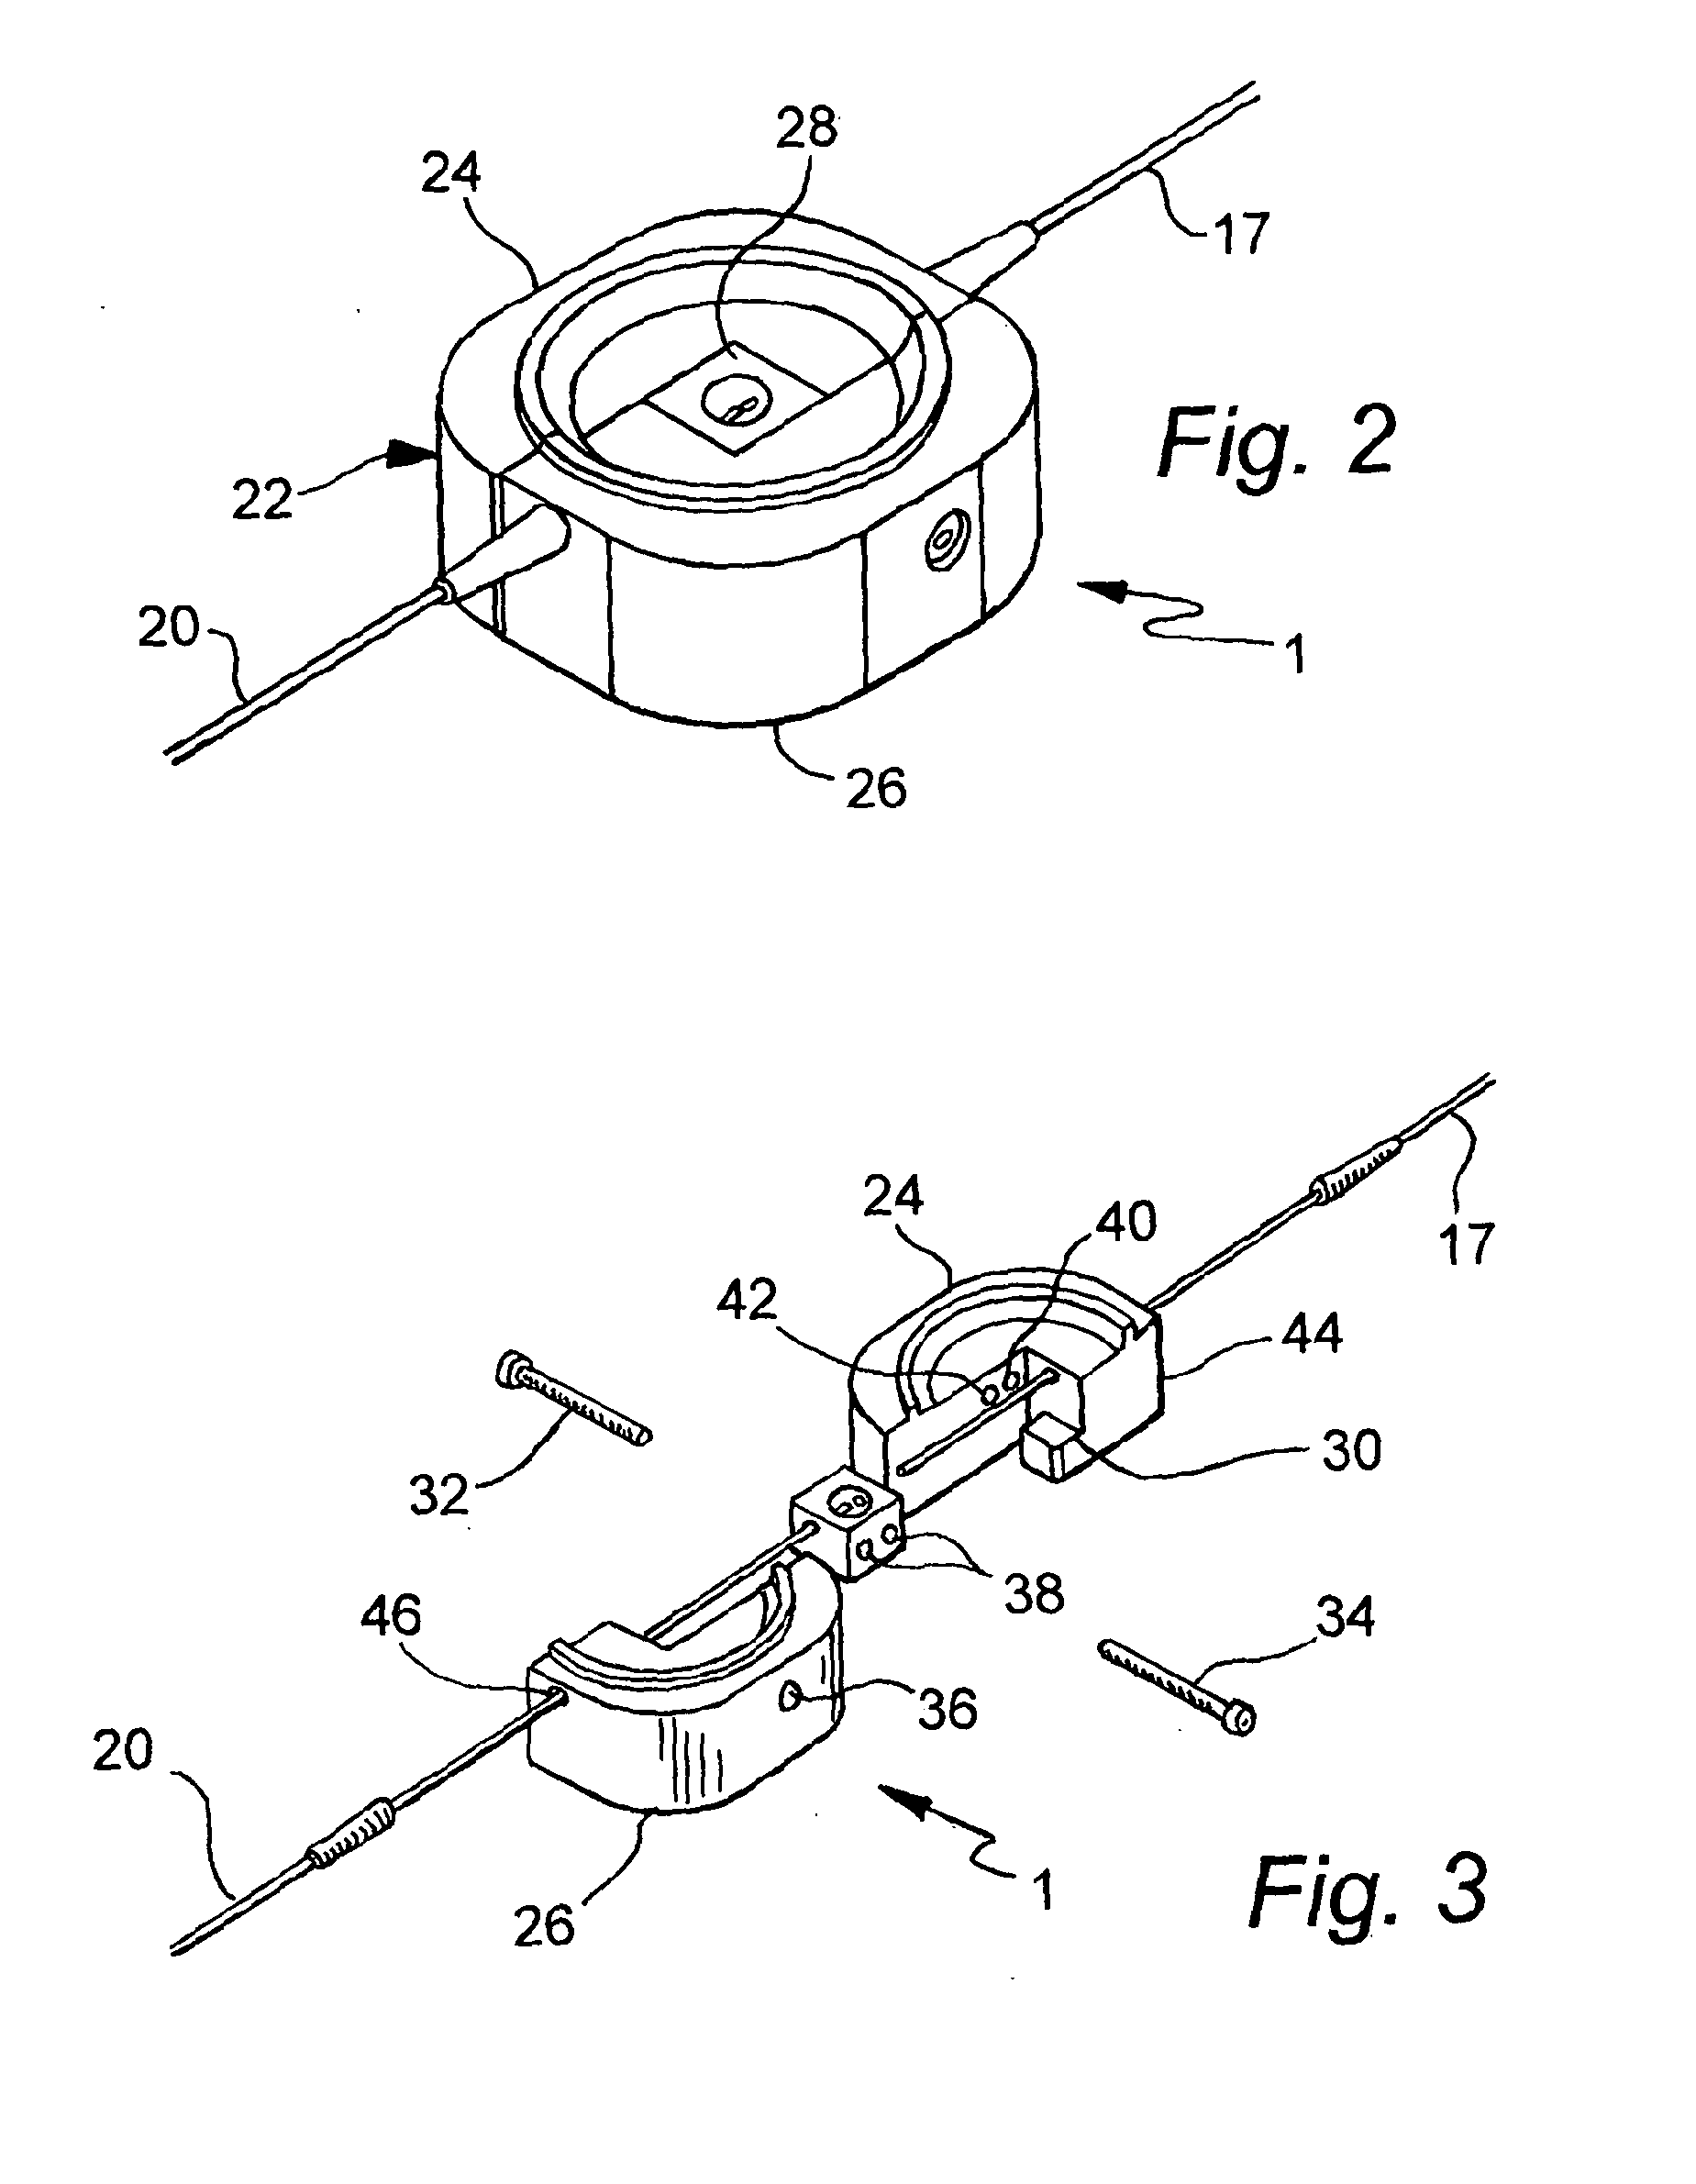 Device for receiving small volume liquid samples